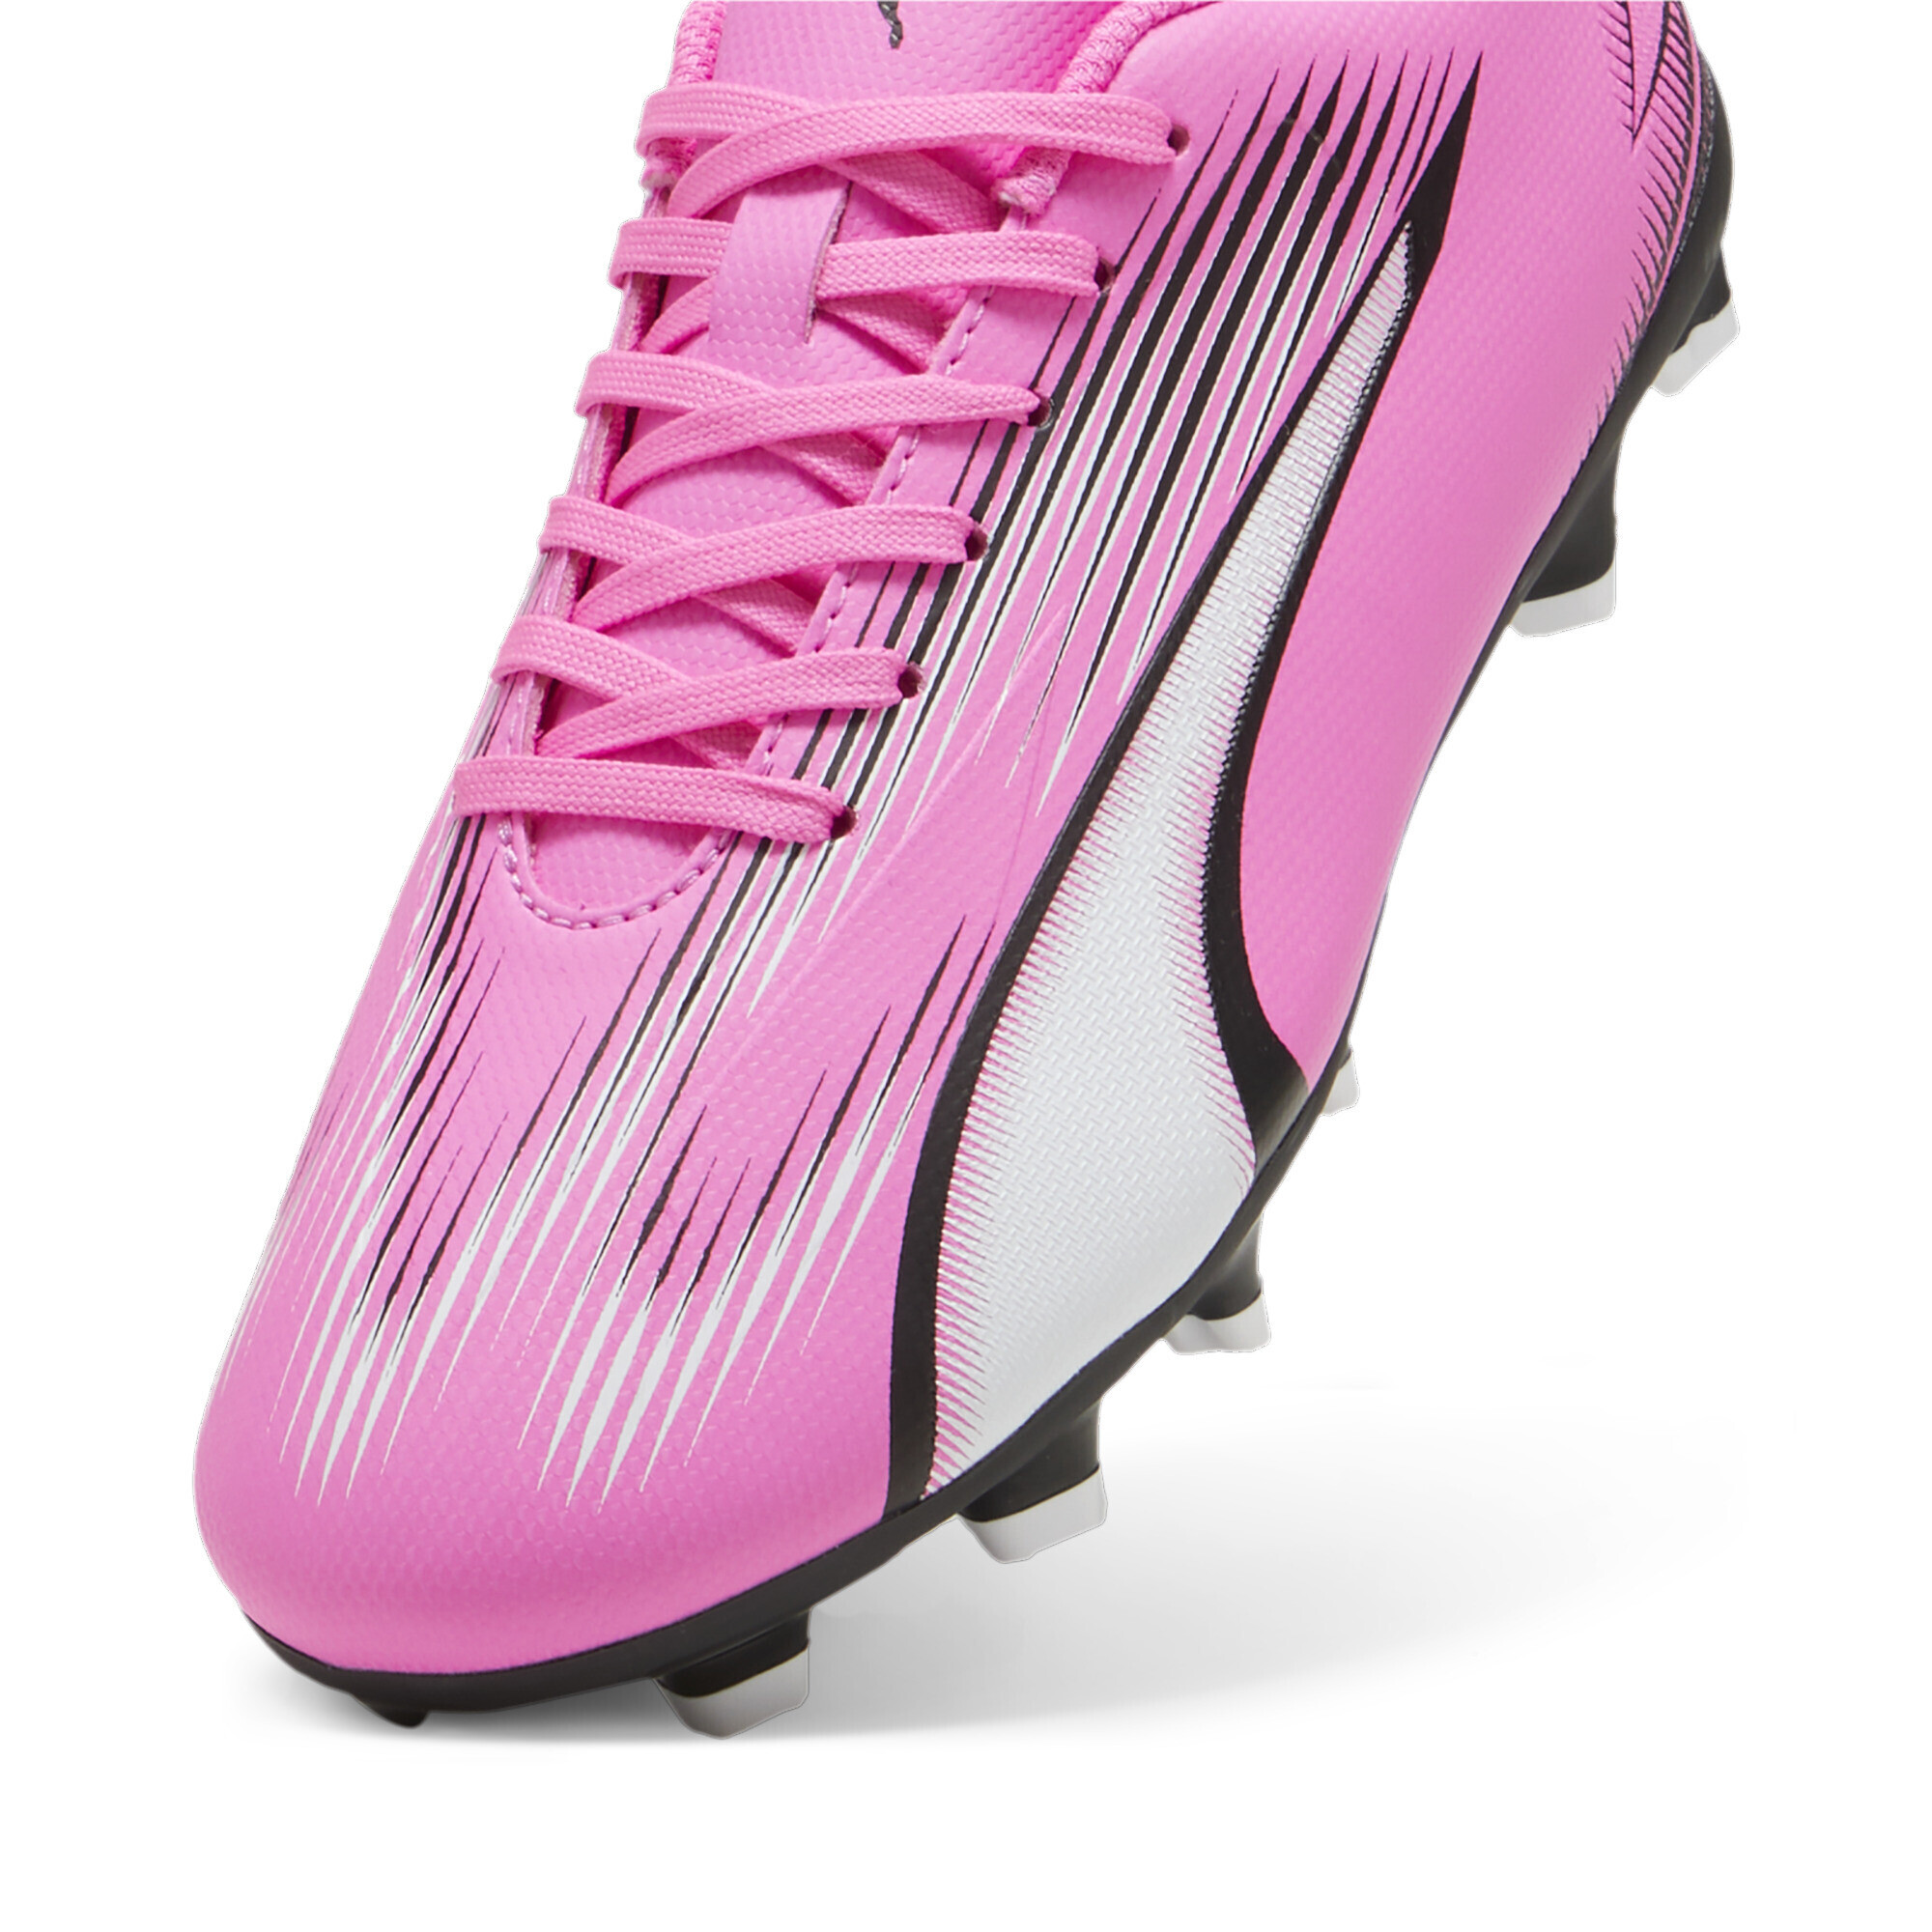 PUMA ULTRA PLAY FG/AG Youth Football Boots In Pink, Size EU 28